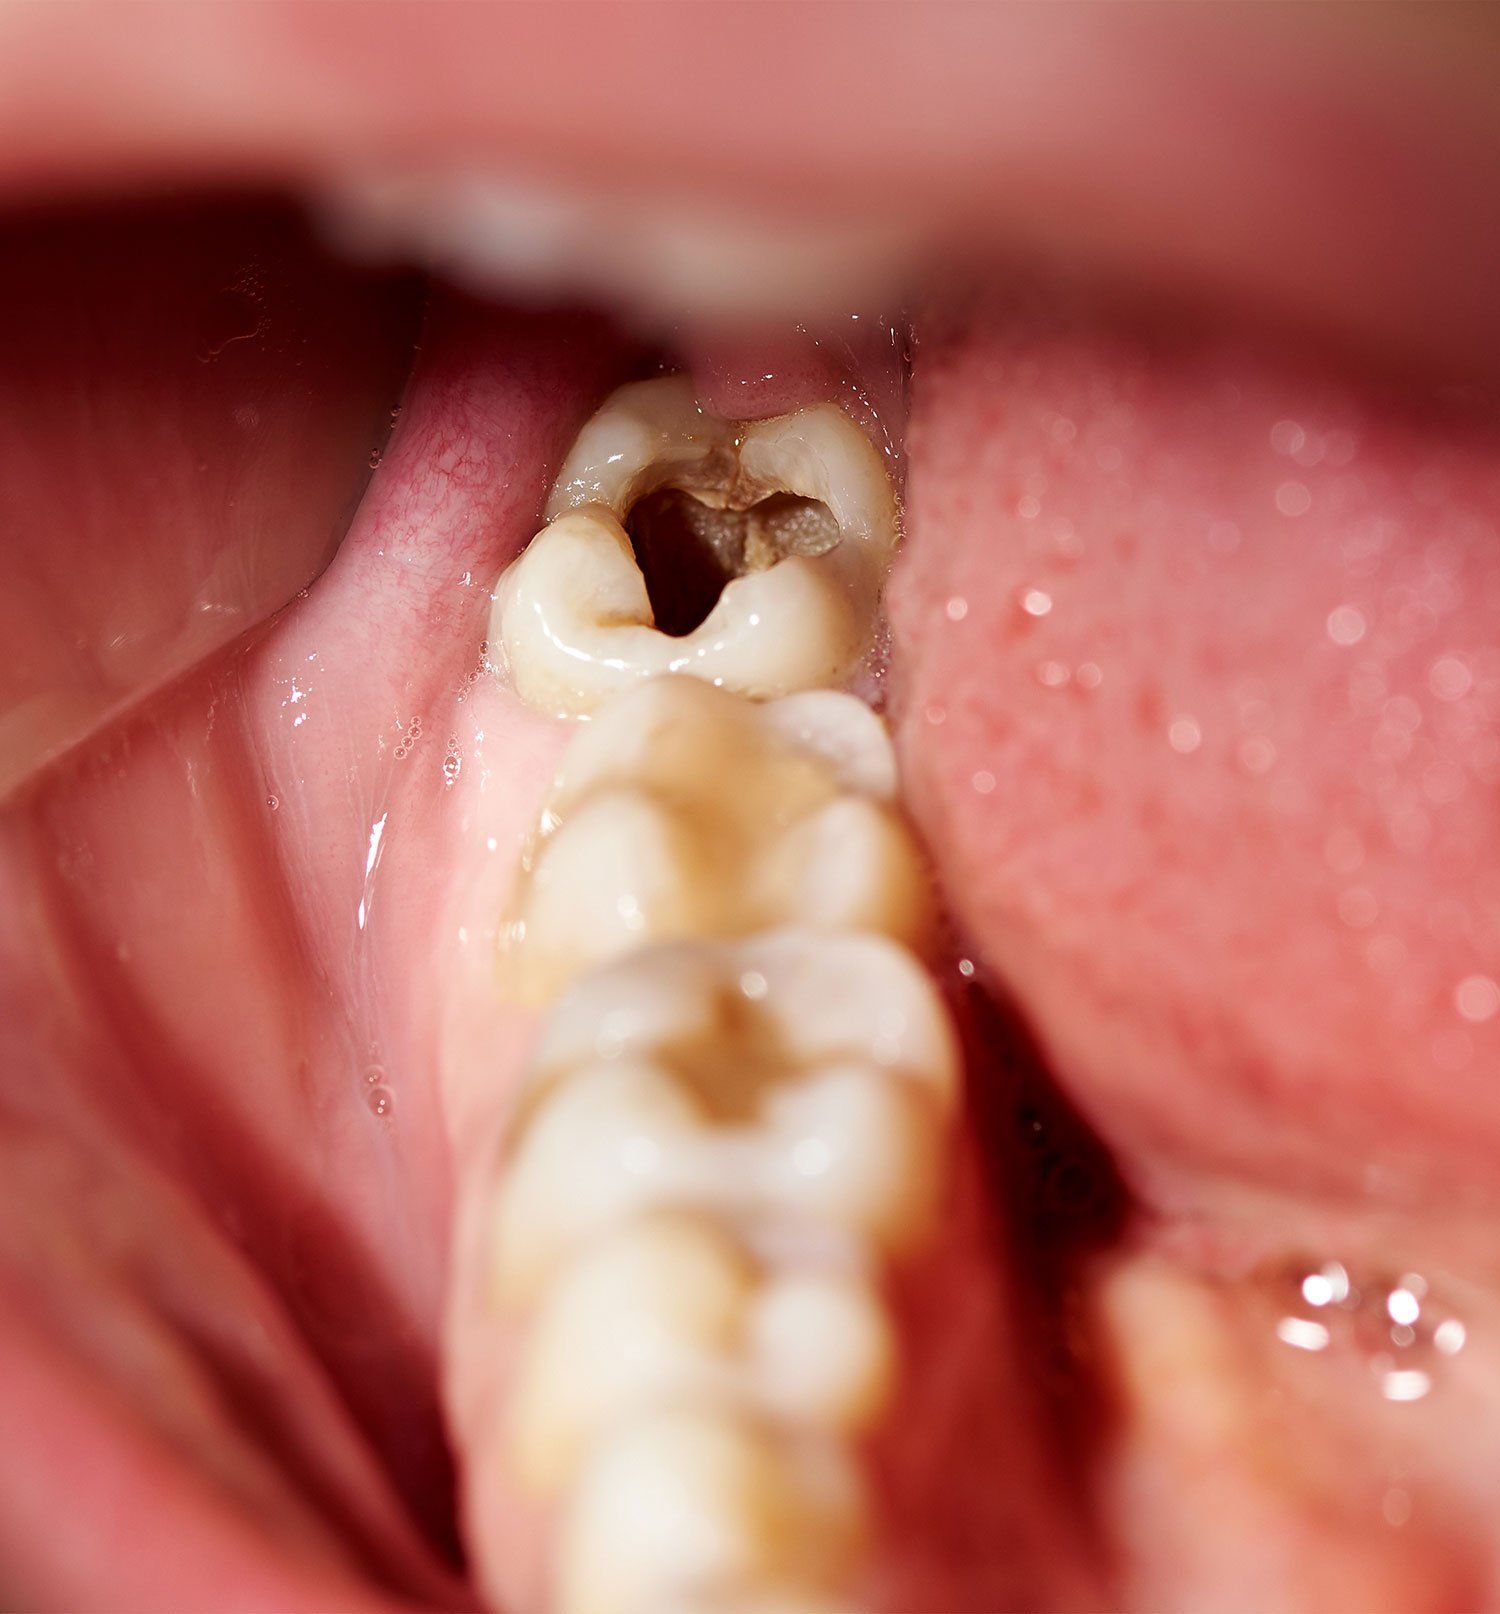 cavity in tooth